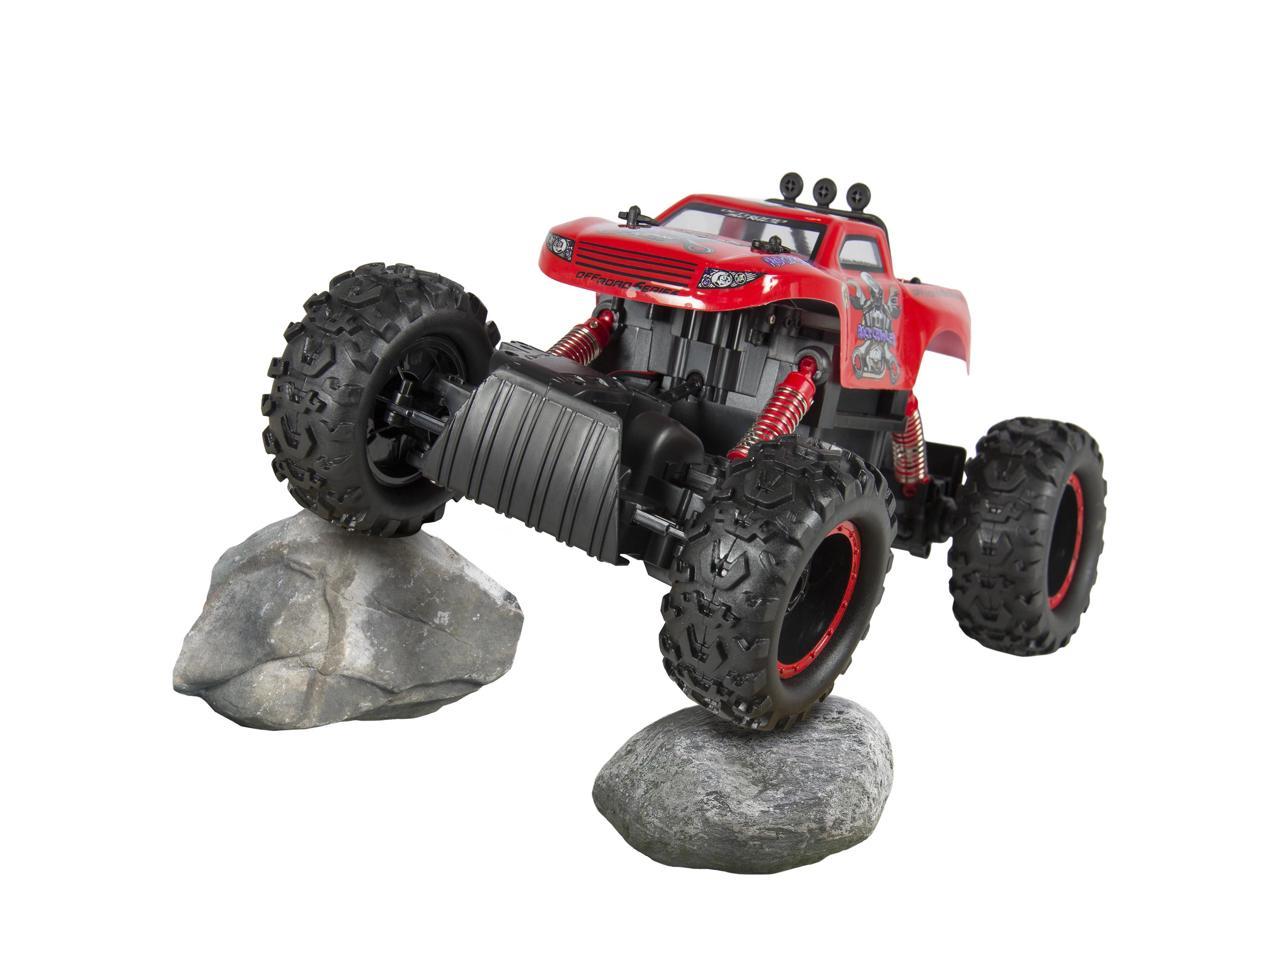 The 4-Wheel Drive Remote Control 1/12 scale monster truck ($28.99) features off-road tire tread to help it climb over all sorts of things like rocks, dirt, or your little sister.